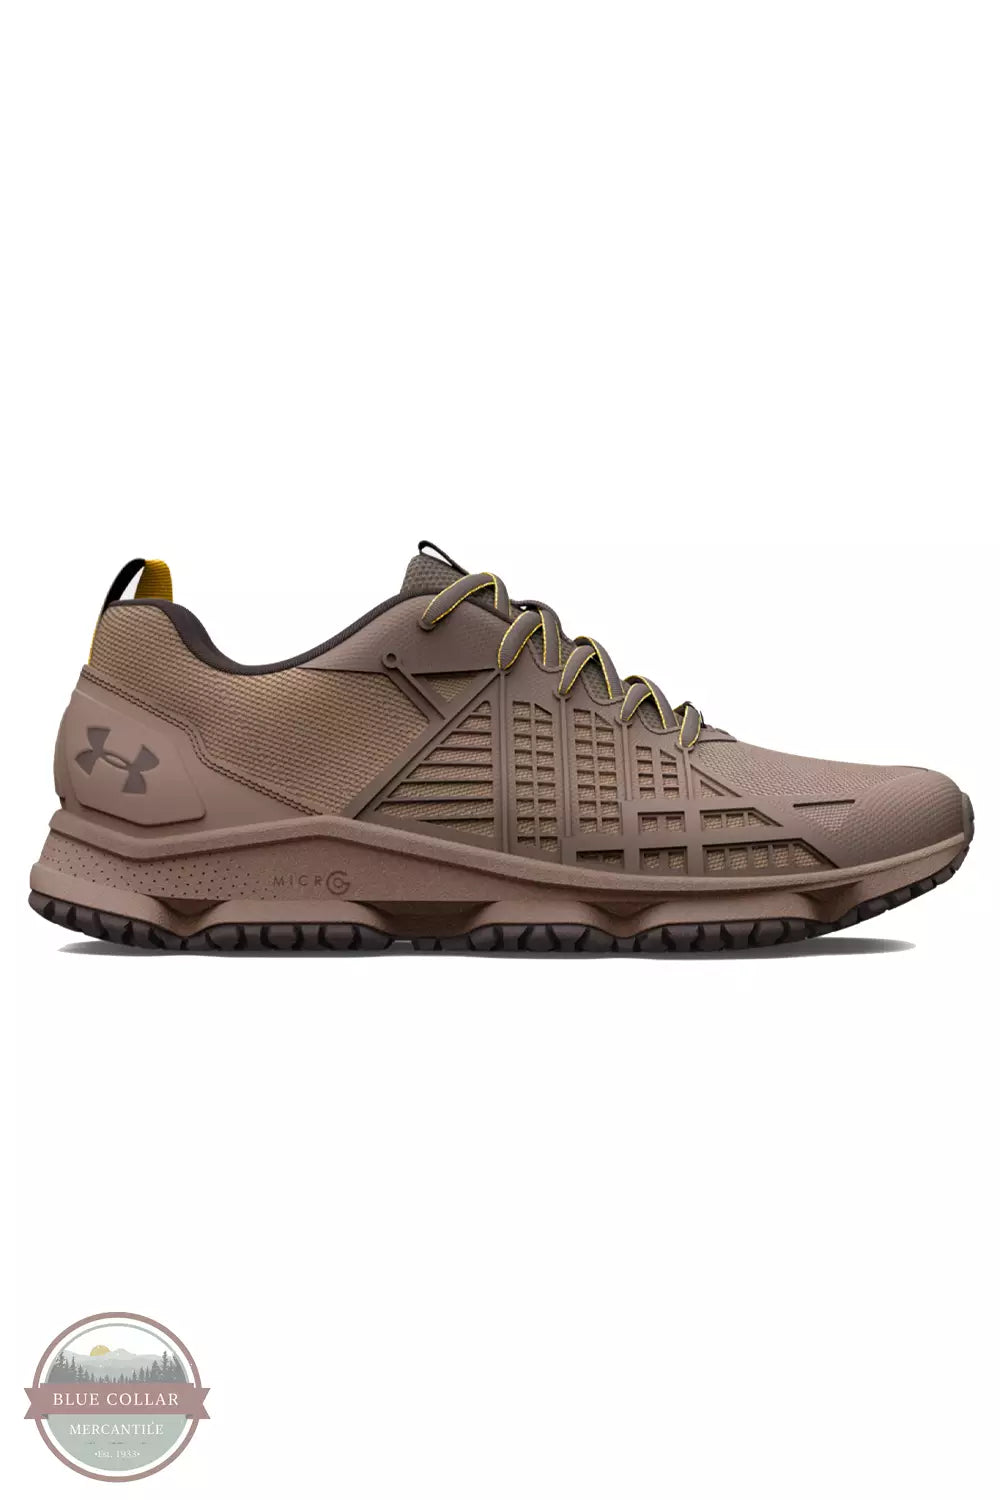 Under Armour 3024953-201 Micro G Strikefast Tactical Shoes in Brown Clay / Peppercorn Side View